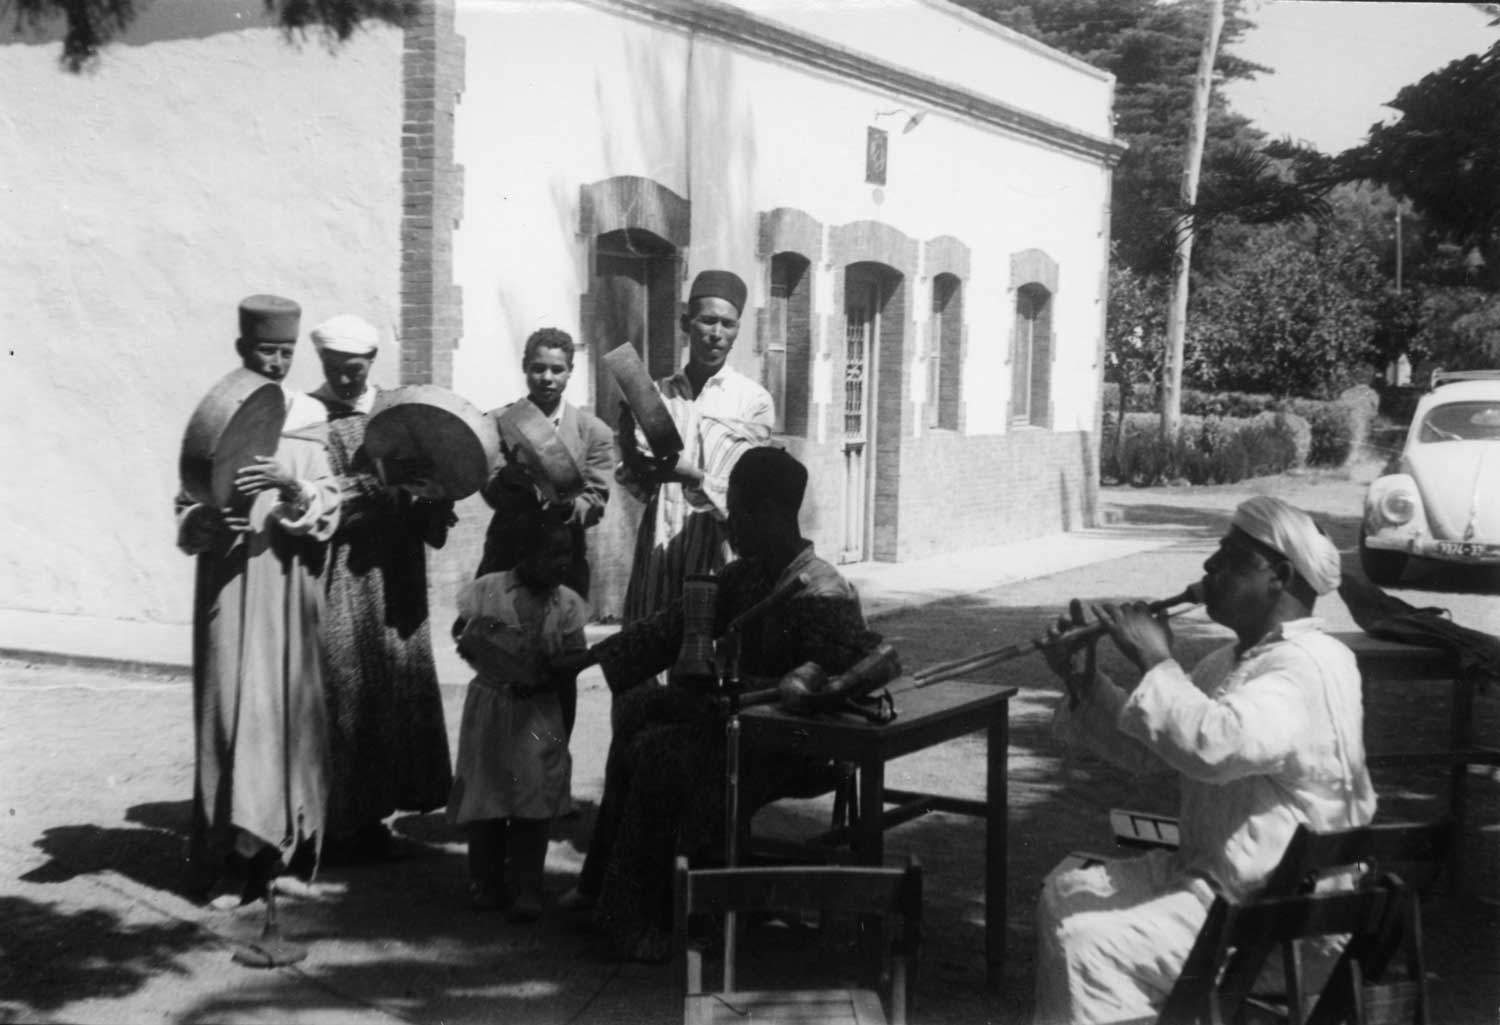 Musicians of the Beni Bouifrour being recorded in Segangan, Morocco